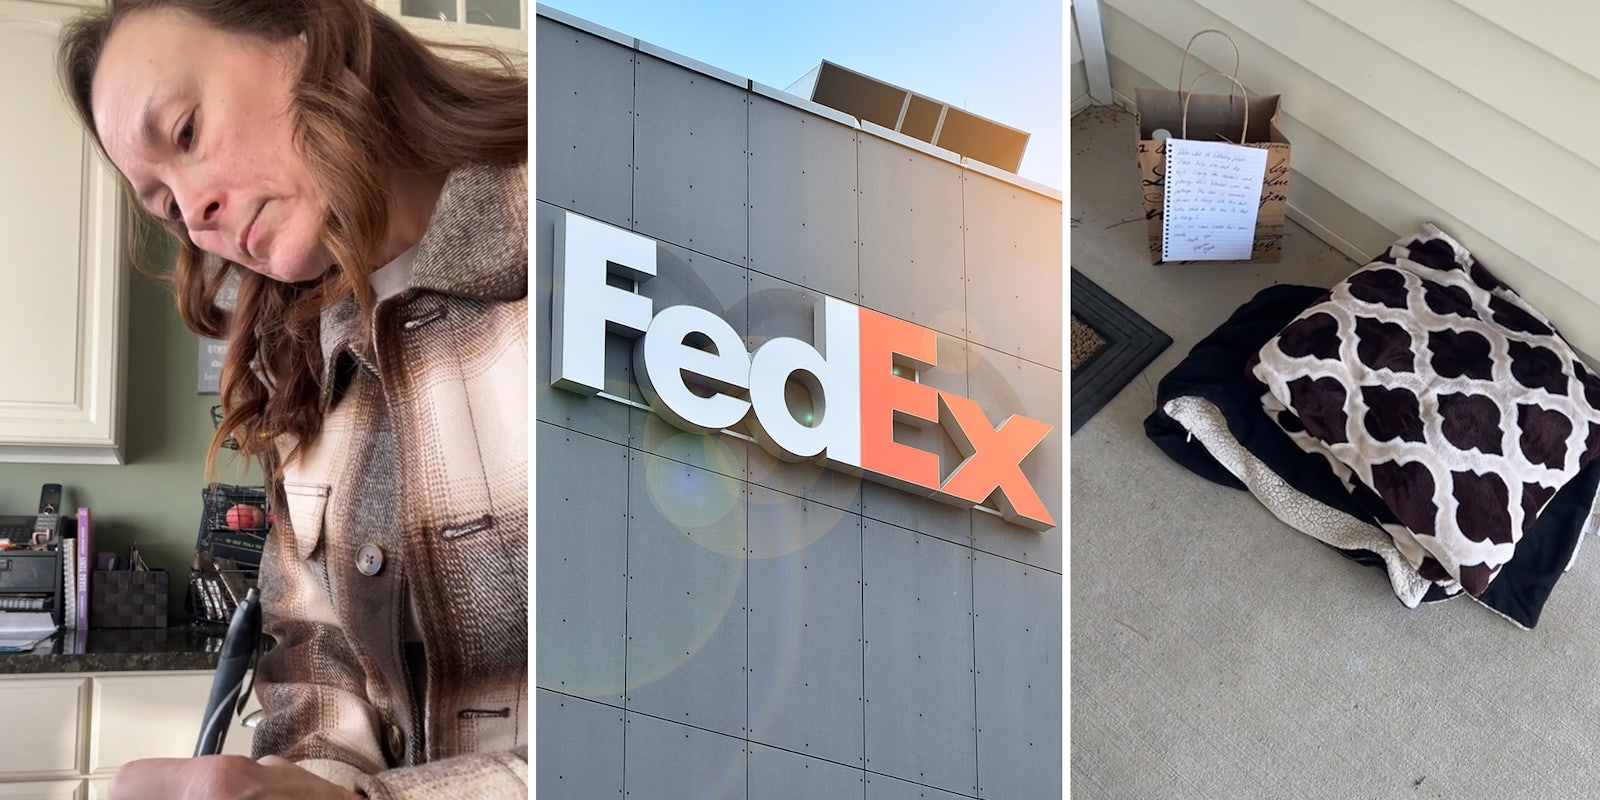 Woman bribes FedEx driver so he will leave package at the door